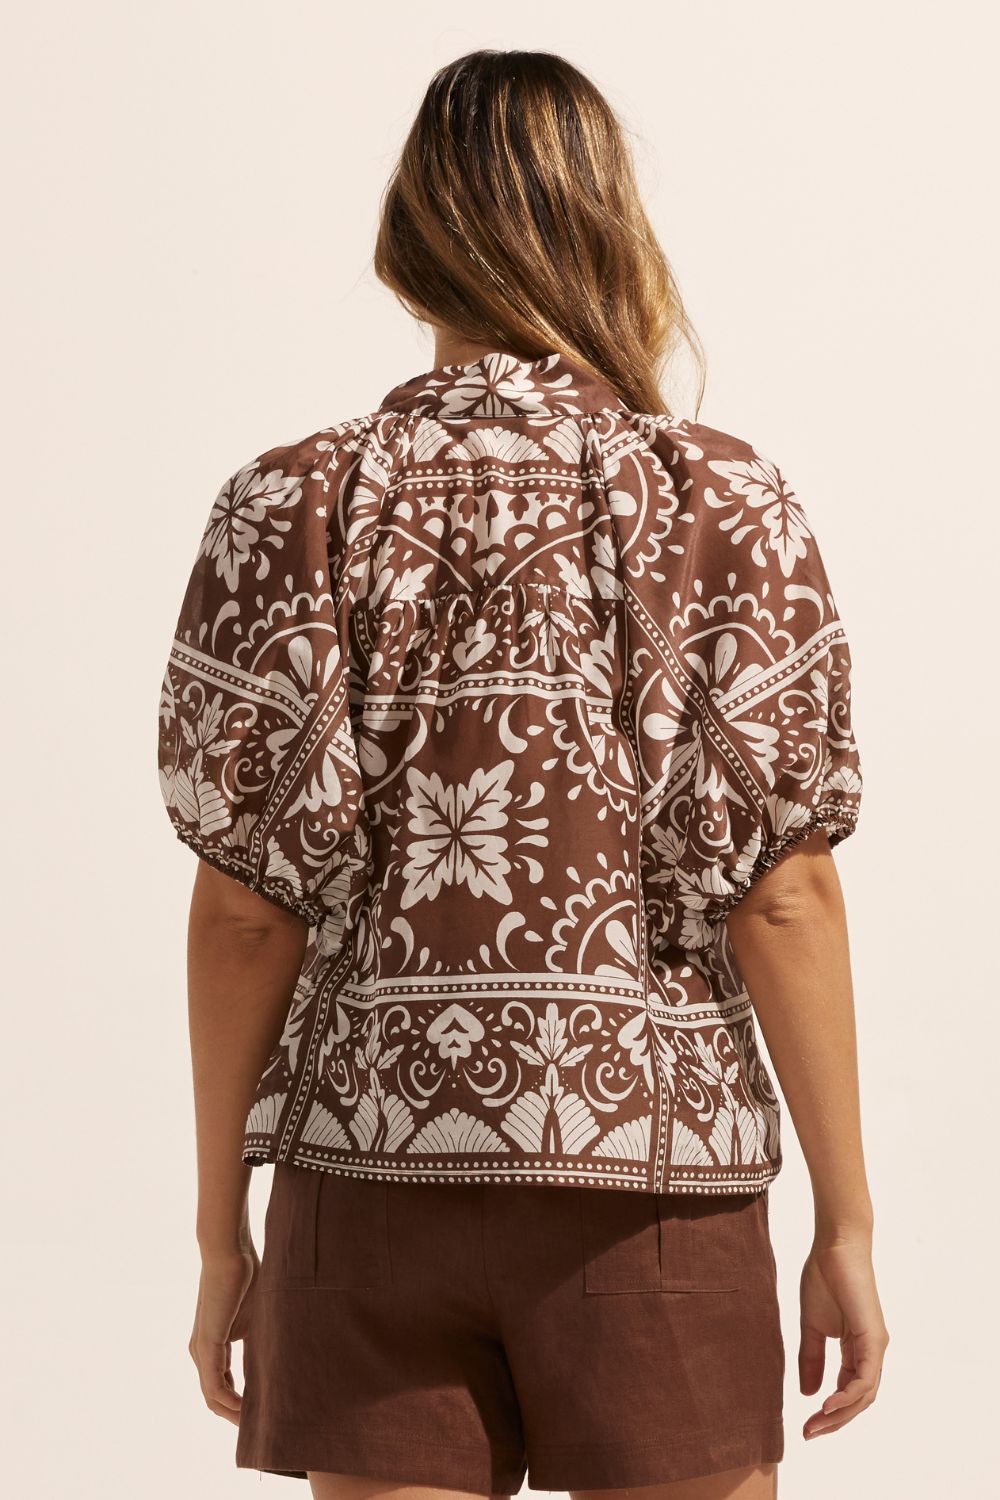 brown and white print, top, high neck, button down, mid length sleeve, back image